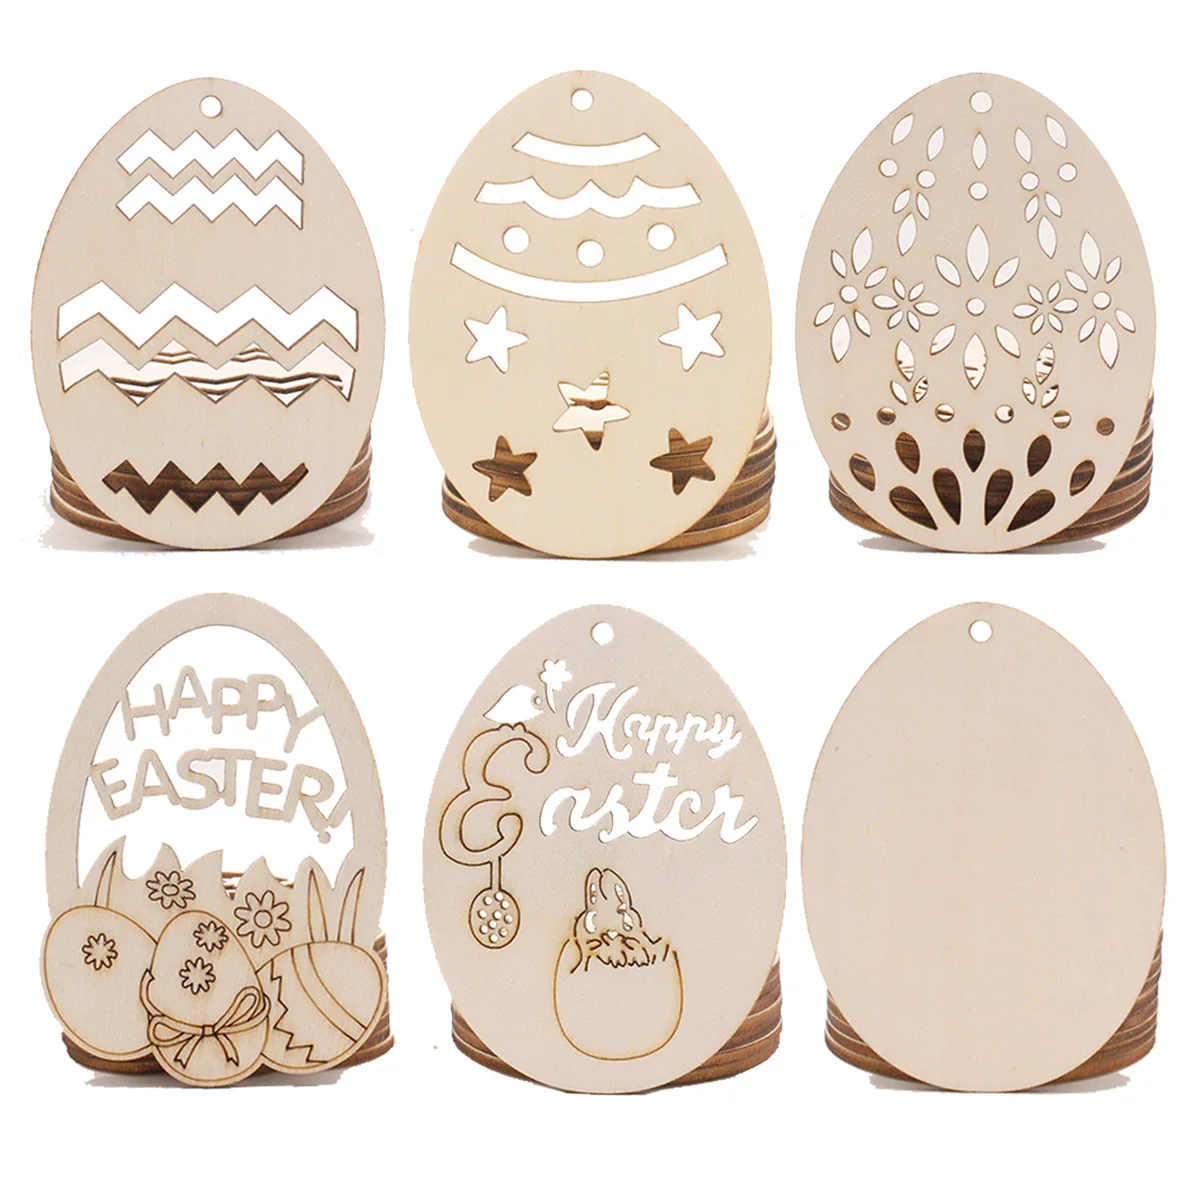 

10pcs Unfinished Wood Easter Ornament Easter Egg Cutouts Hang Tags Gift Tags Treats Tags with Strings for DIY Craft Decorations